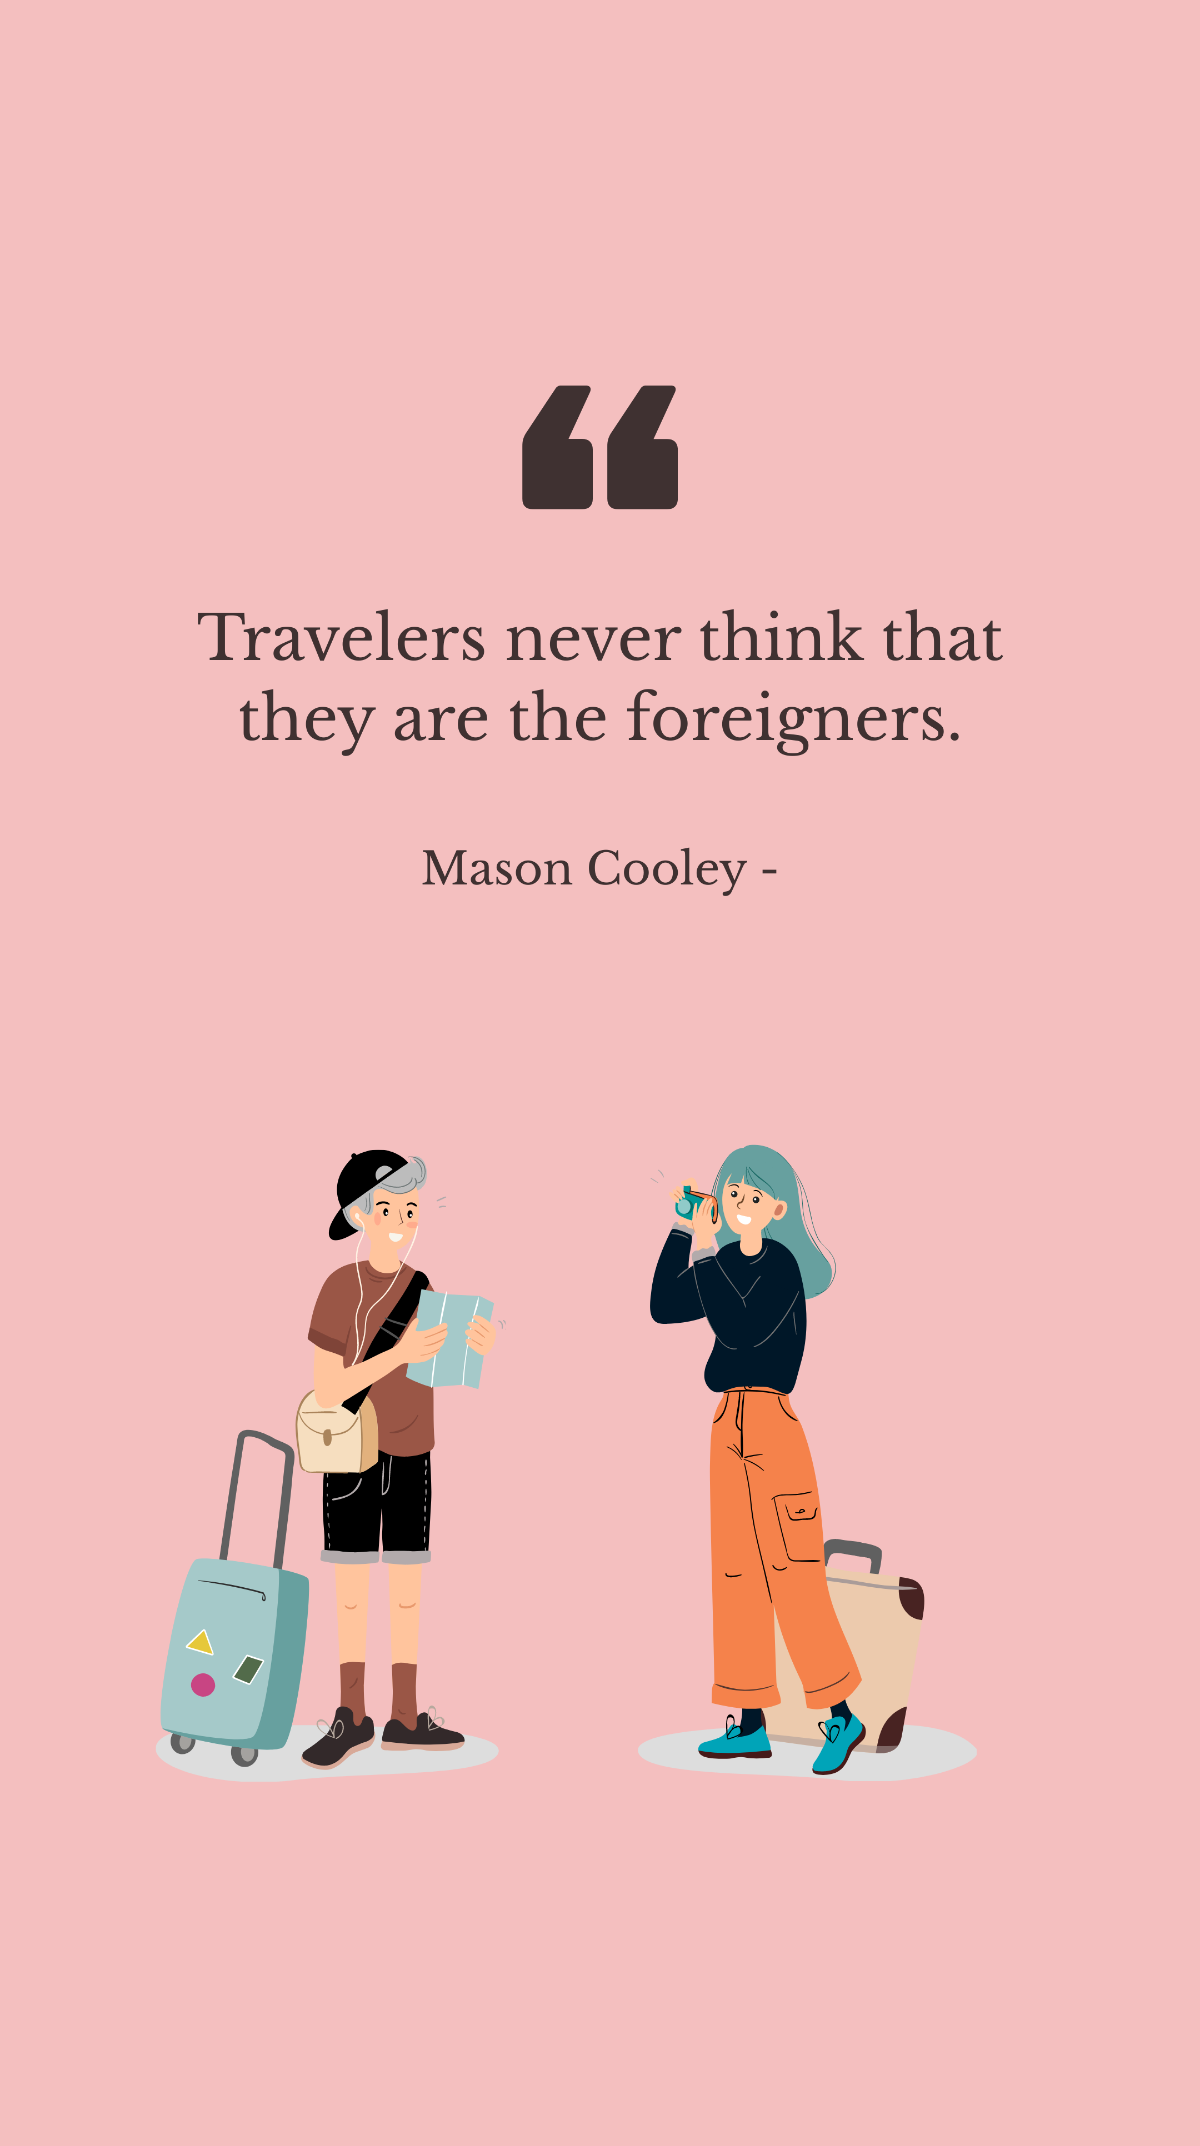 Mason Cooley - Travelers never think that they are the foreigners. Template